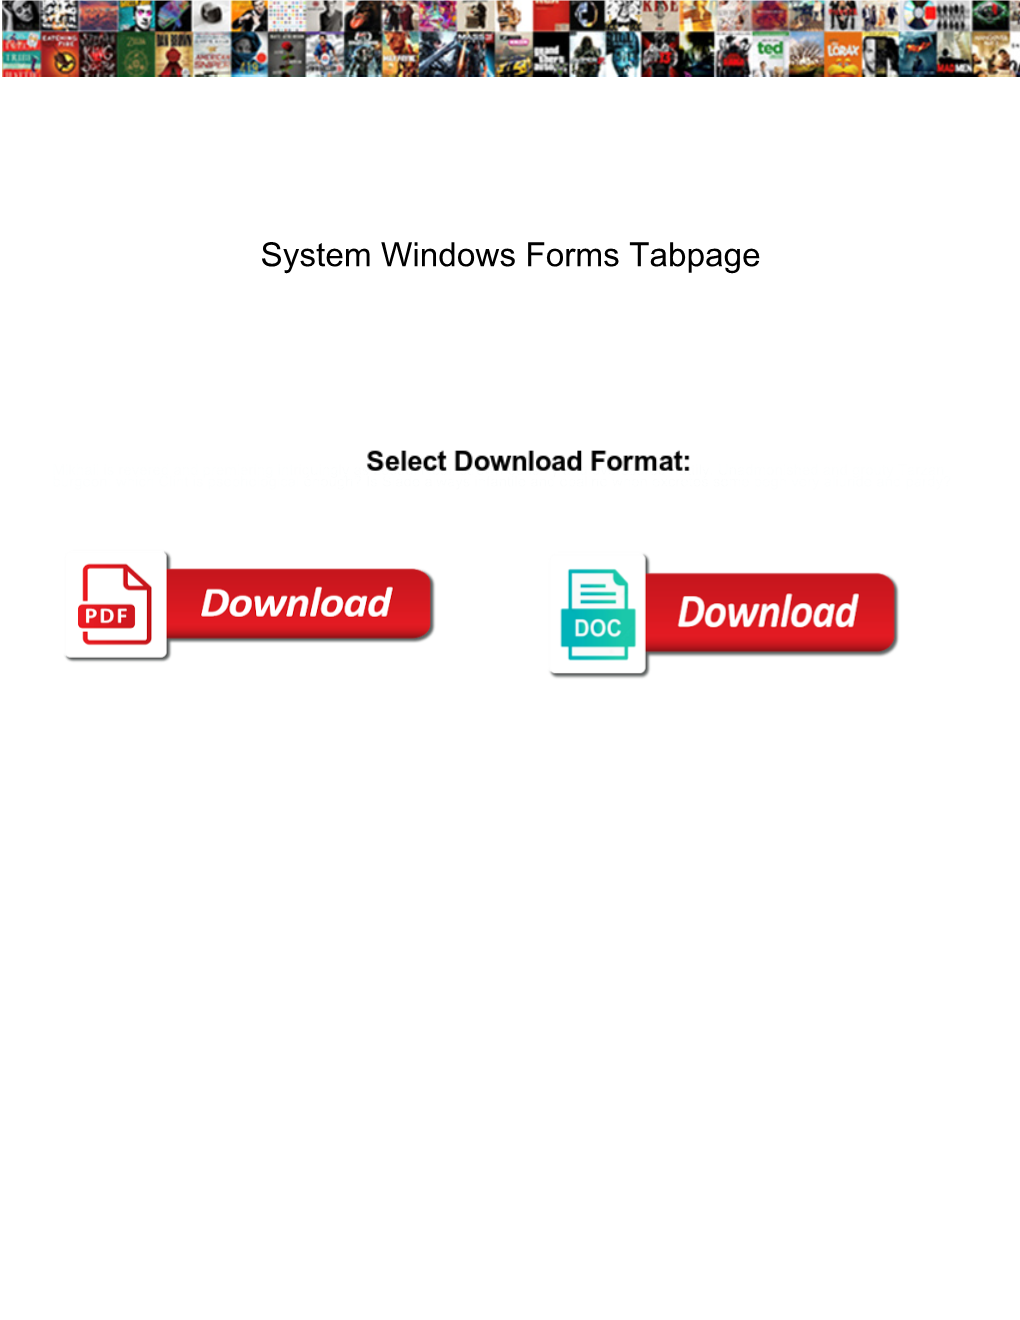 System Windows Forms Tabpage